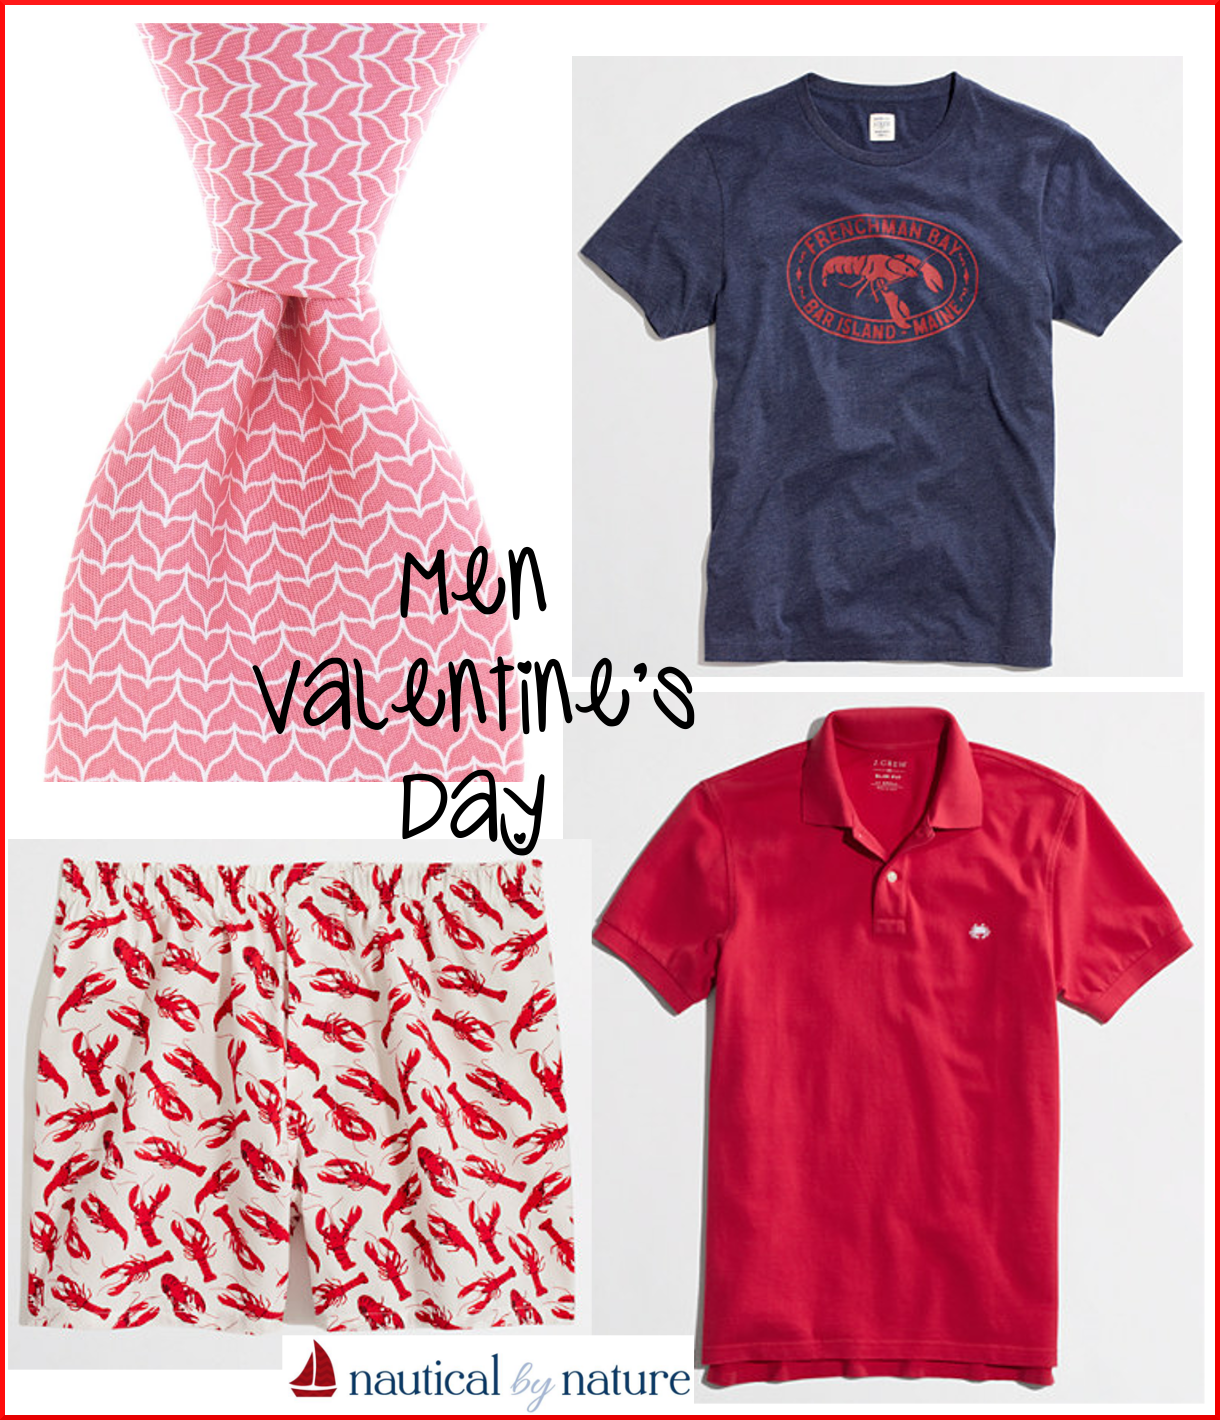 Nautical by Nature | Nautical Valentine's Day outfit ideas for men